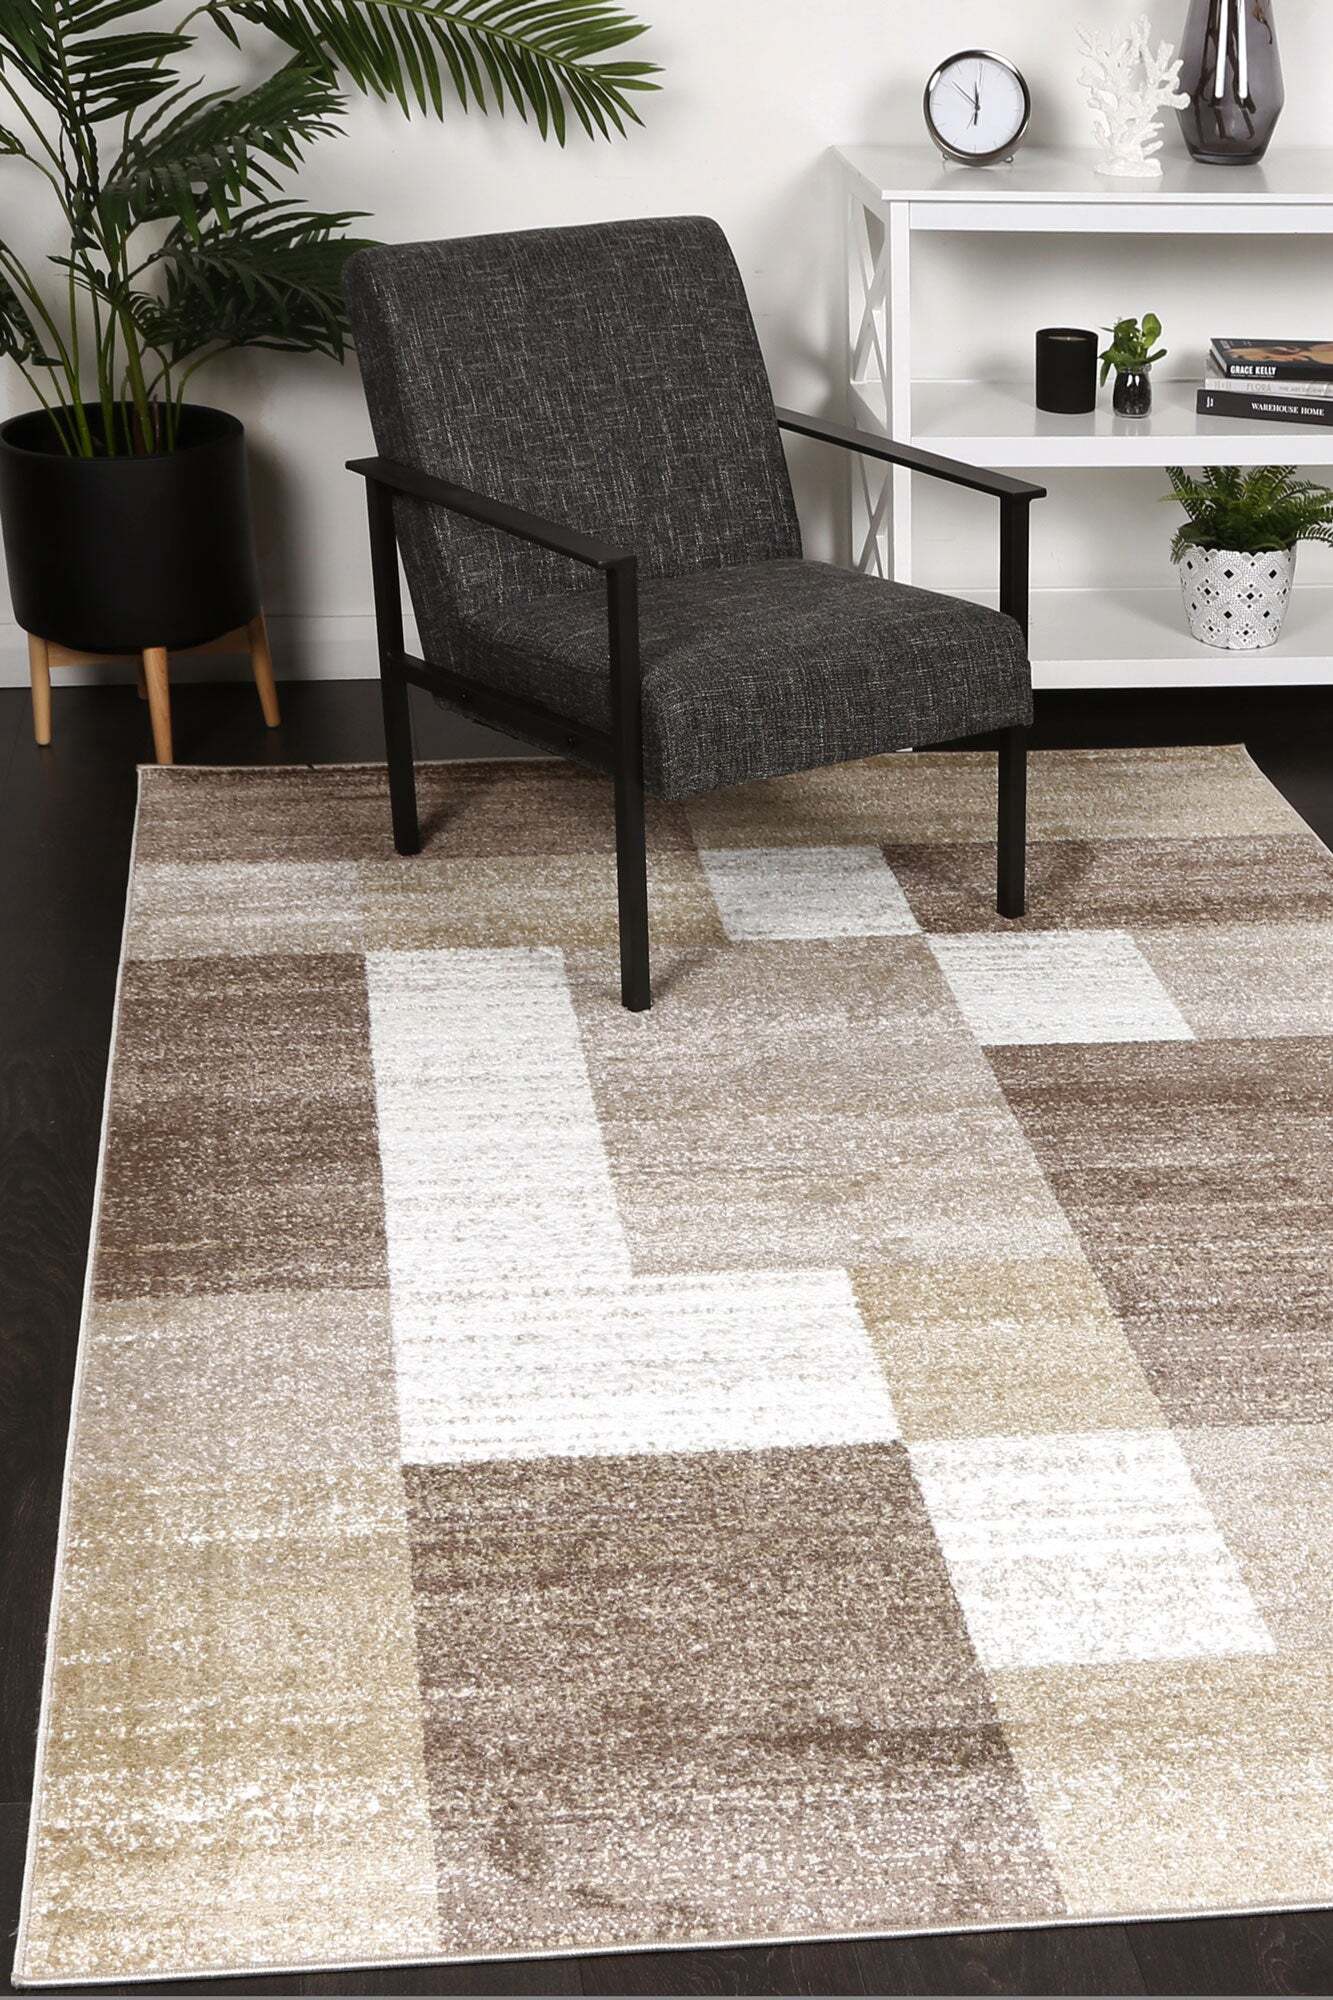 Kelly Geometric Abstract Rug(Size 150 x 80cm)